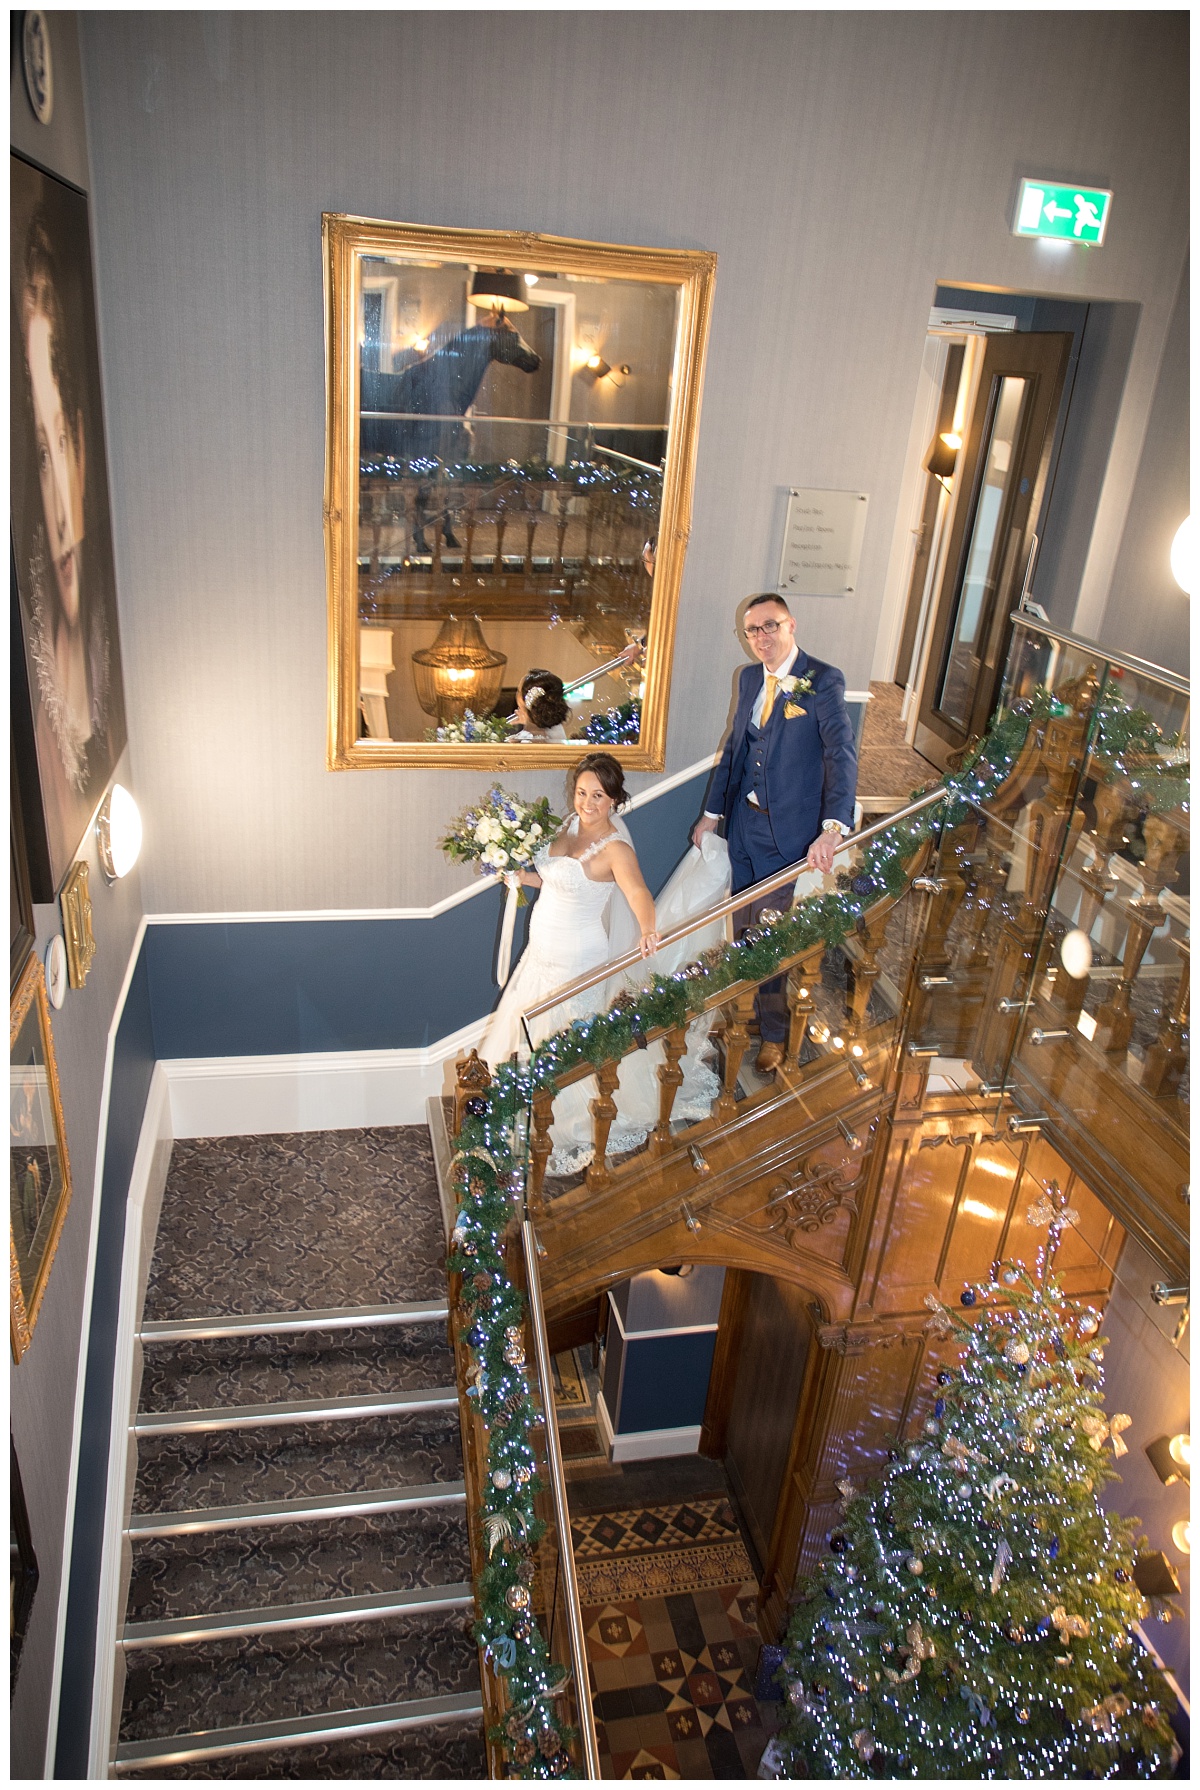 Wedding Photography Manchester - Jemma and Mark's Oddfellows On The Park NYE Wedding 65